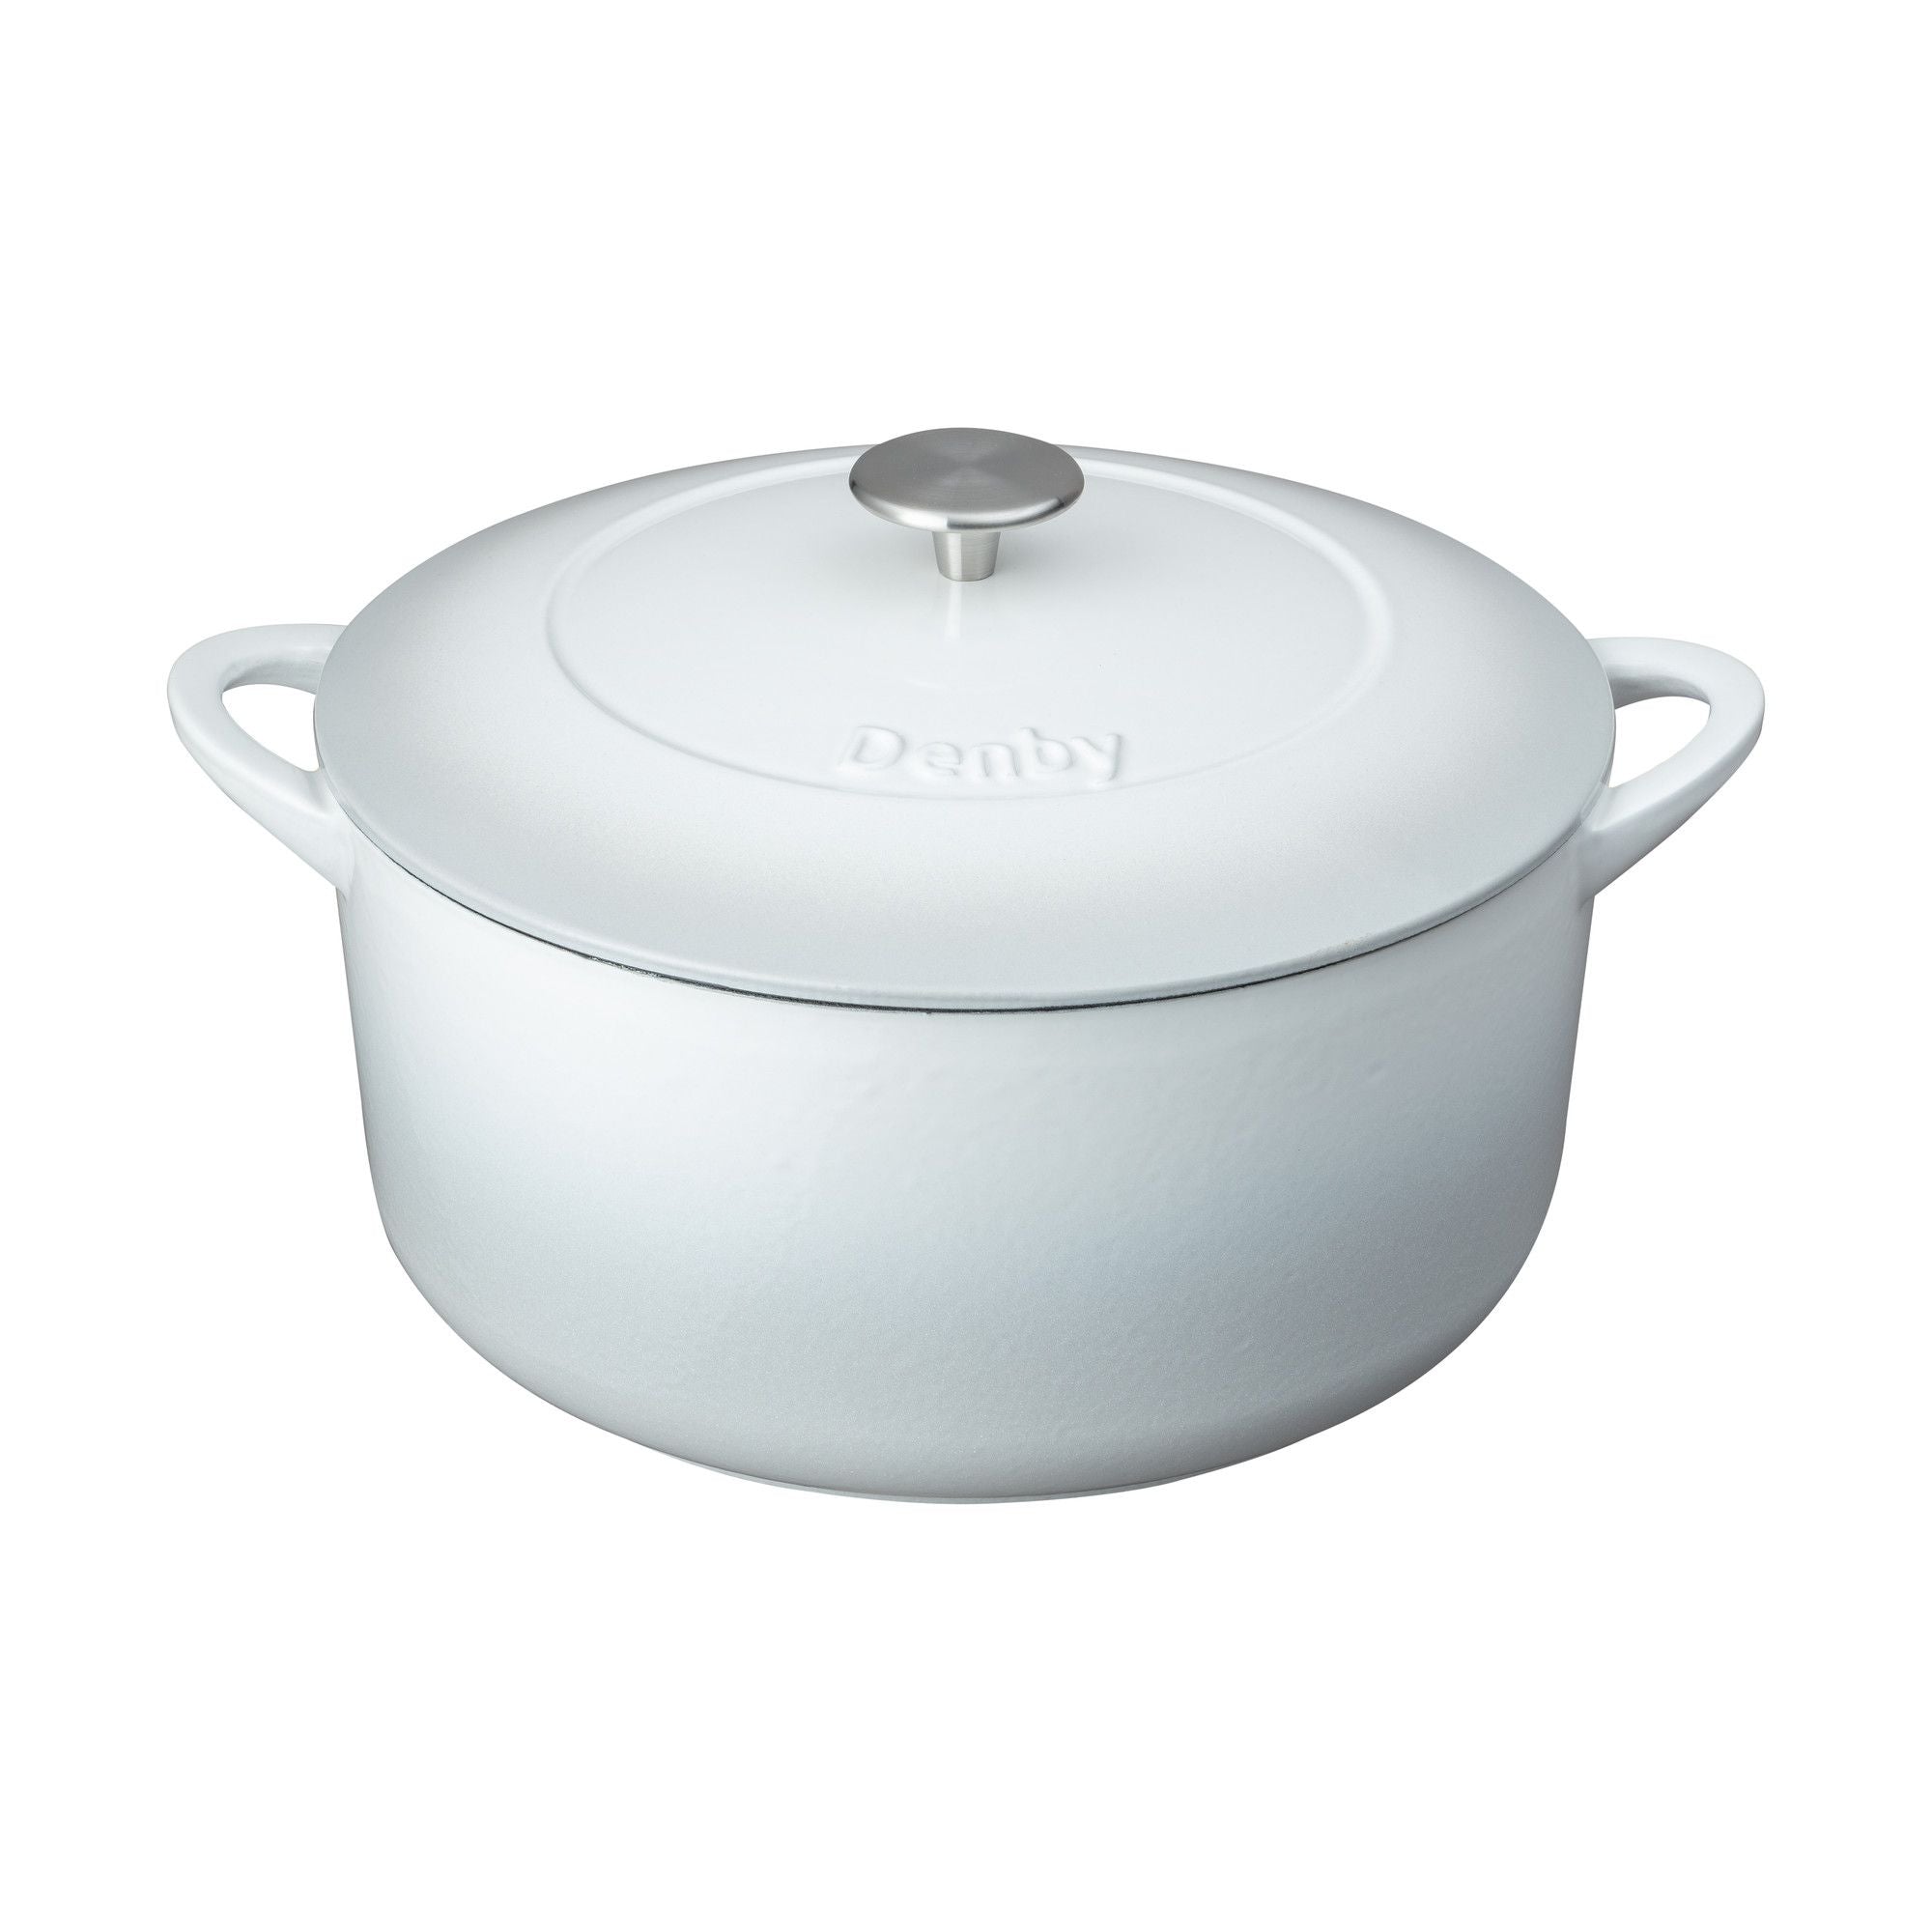 Denby Natural Canvas Cast Iron 28cm Round Casserole - Last Chance to Buy